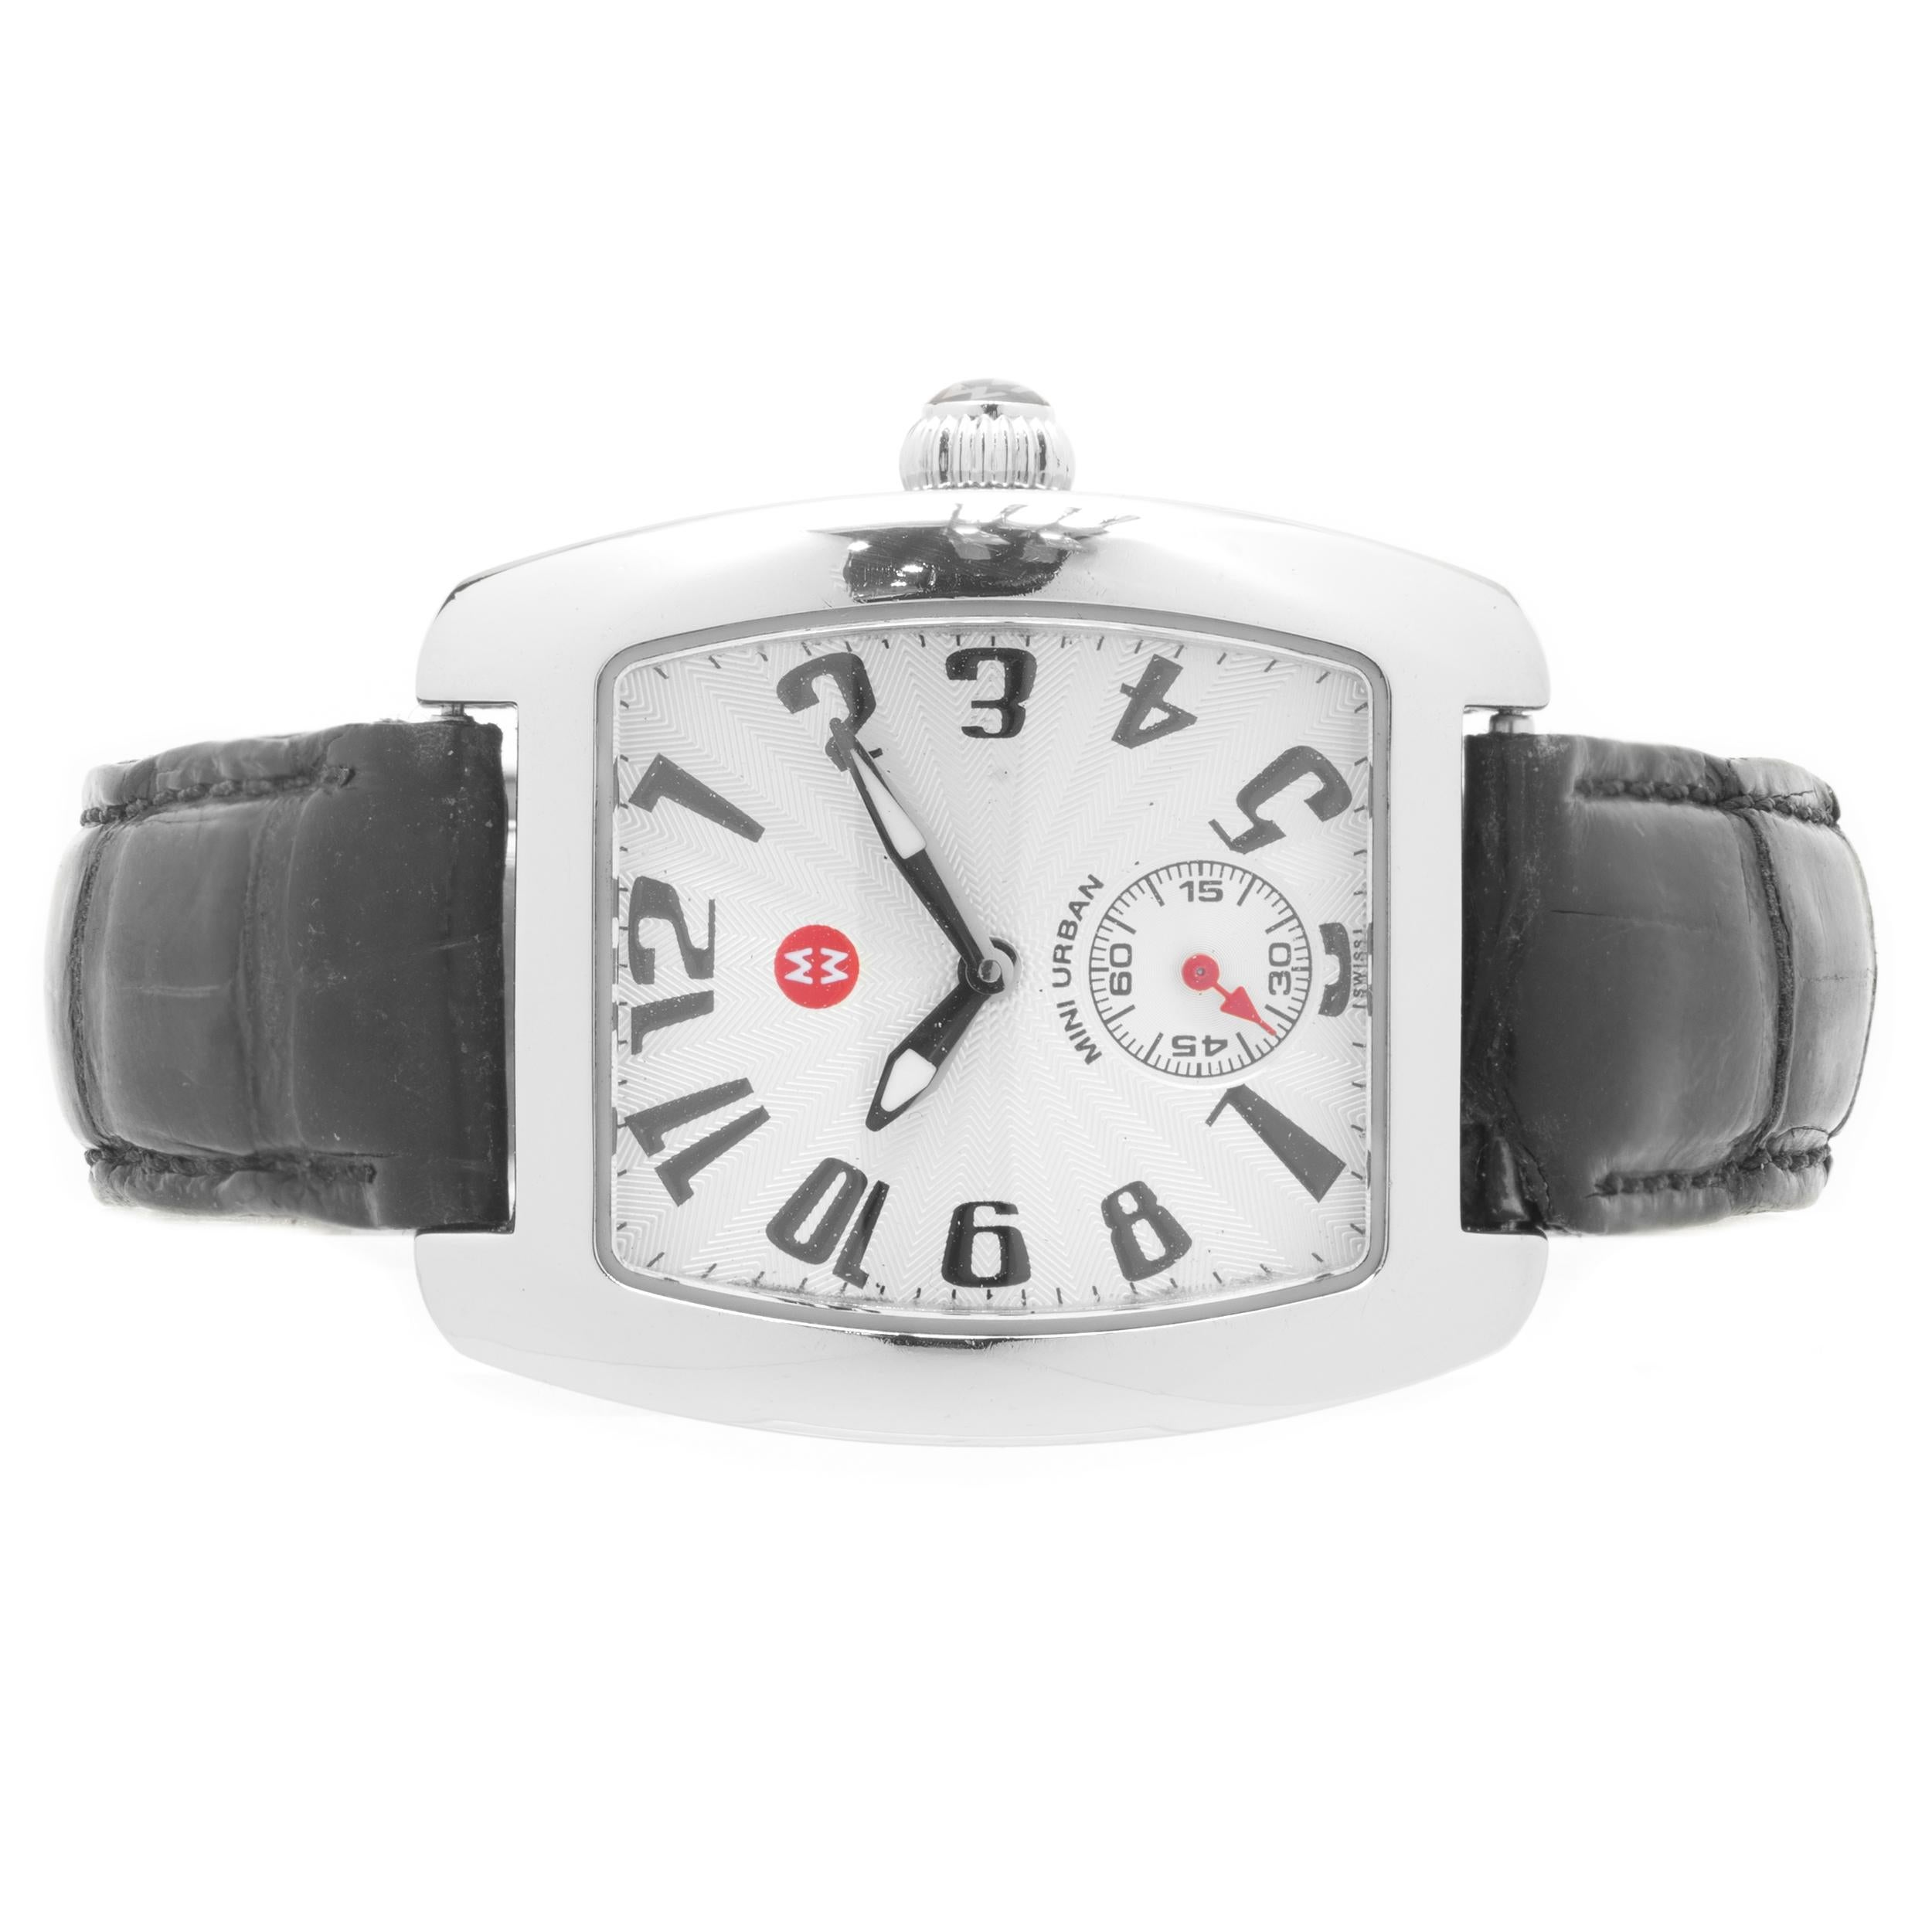 Movement: quartz
Function: hours, minutes, seconds, date, chronograph 
Case: 35mm stainless rectangular case, sapphire crystal
Dial: white arabic dial, stick hour markers 
Band: cherry crocodile strap with buckle
Serial #: MU19XXX
Reference #: